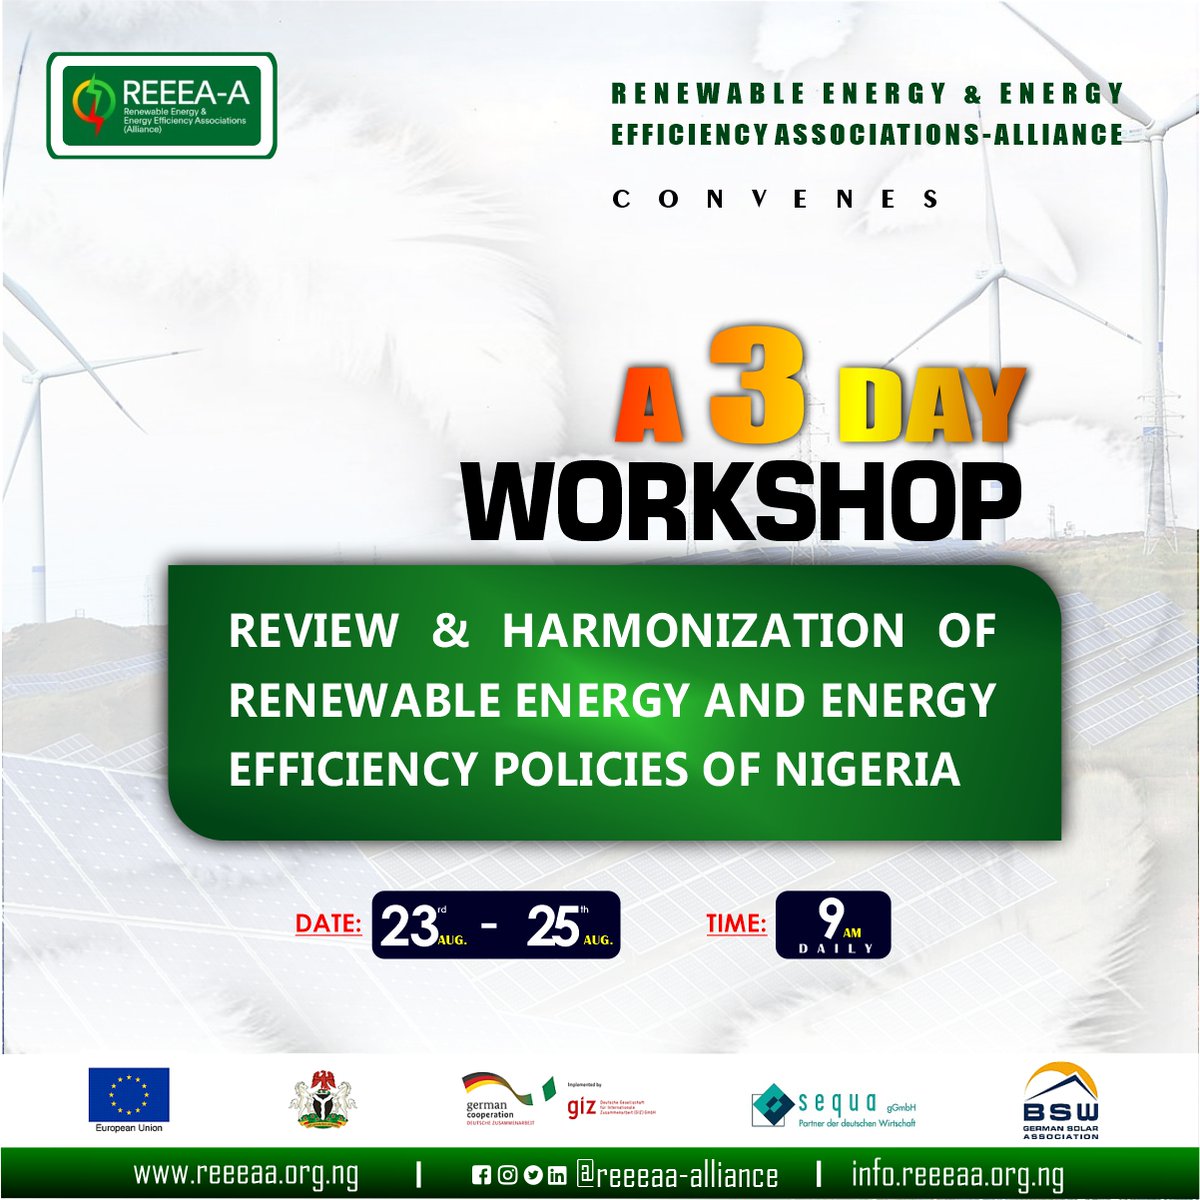 📢📢📢📢📢~ANNOUNCEMENT~📢📢📢📢📢 The Renewable Energy and Energy Efficiency Associations (Alliance) is convening A 3-Day Worshop: 'Review and Harmonization of Renewable Energy and Energy Efficiency Policies of Nigeria' 👇👇👇